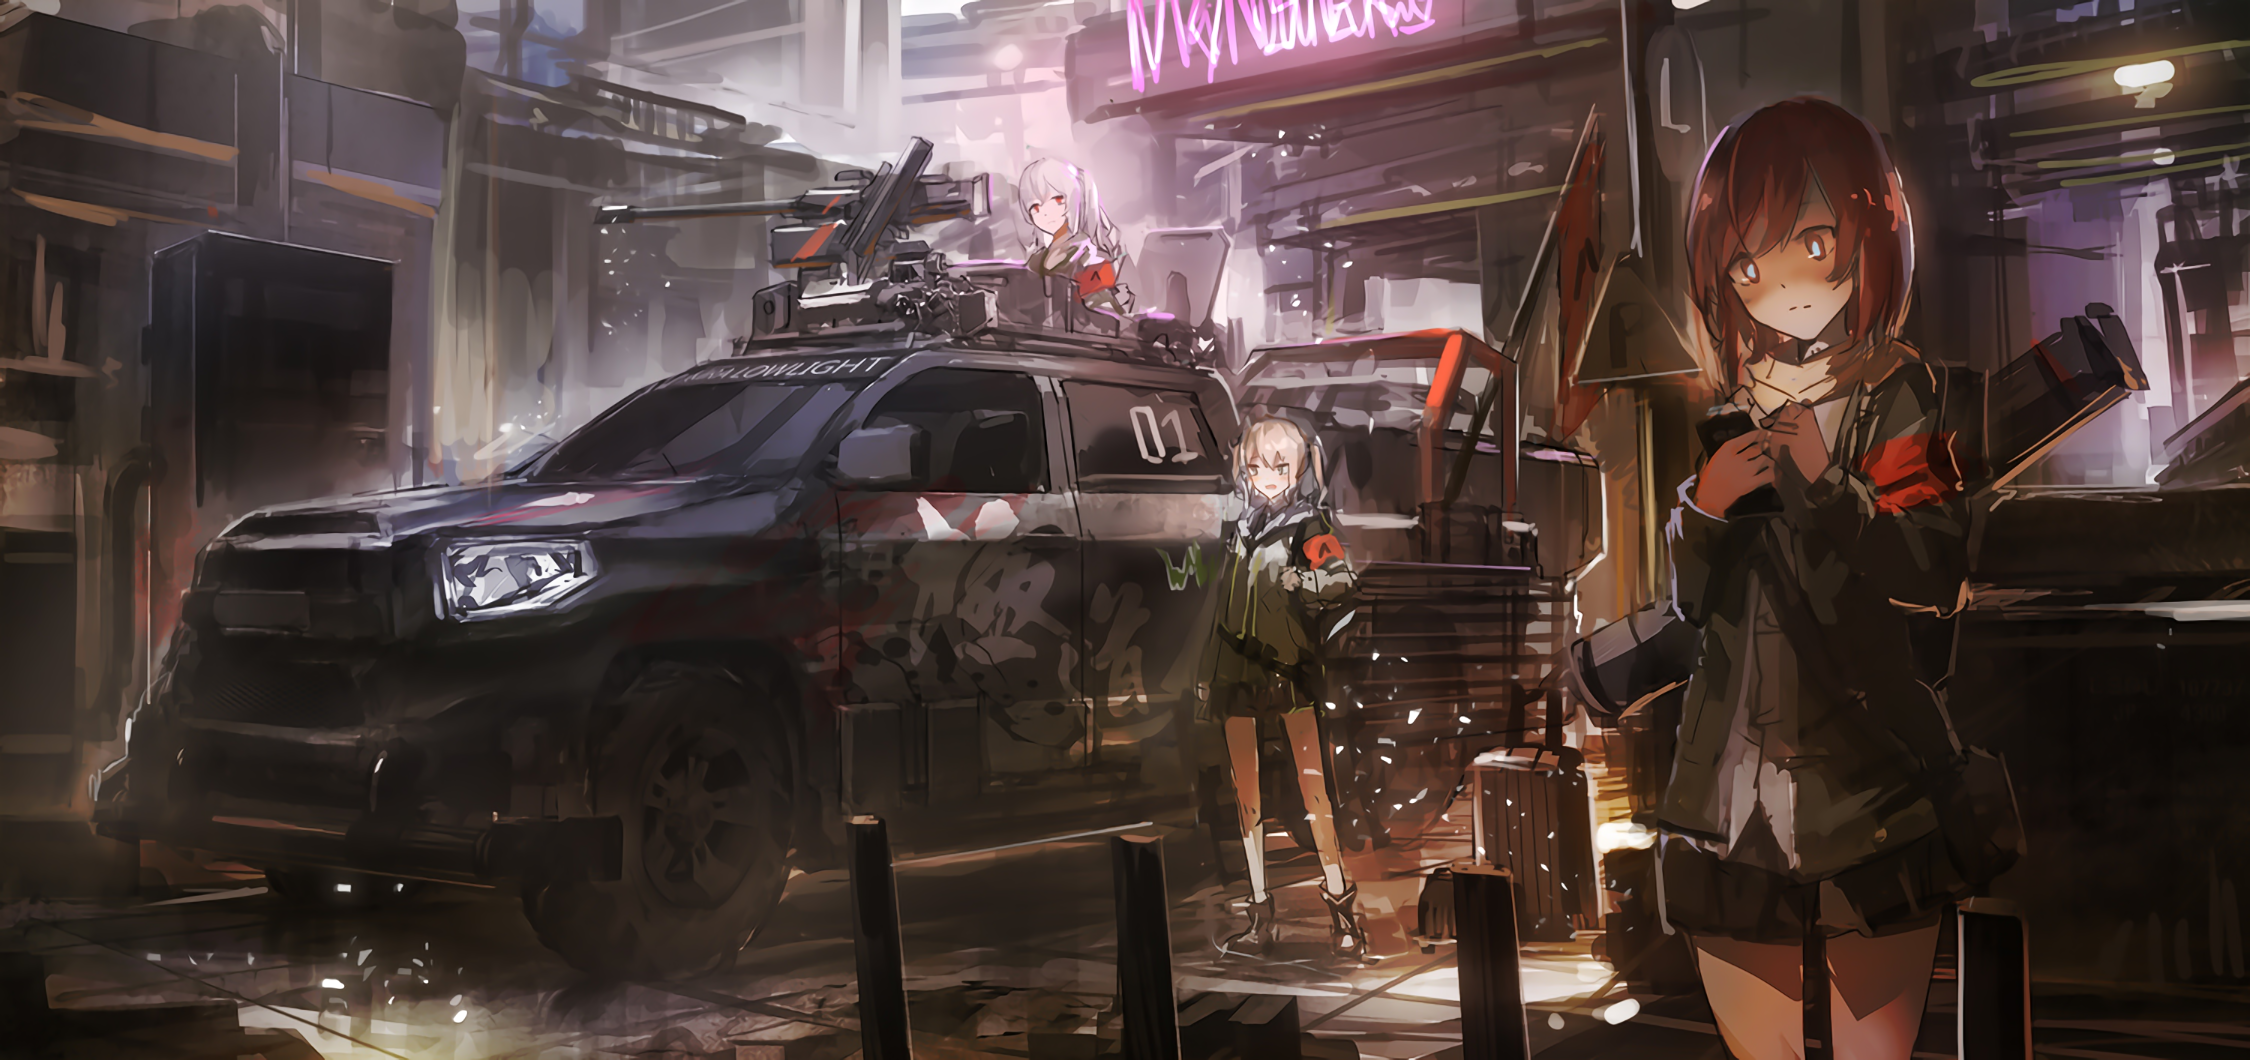 Girls Frontline Wallpaper And Background Image